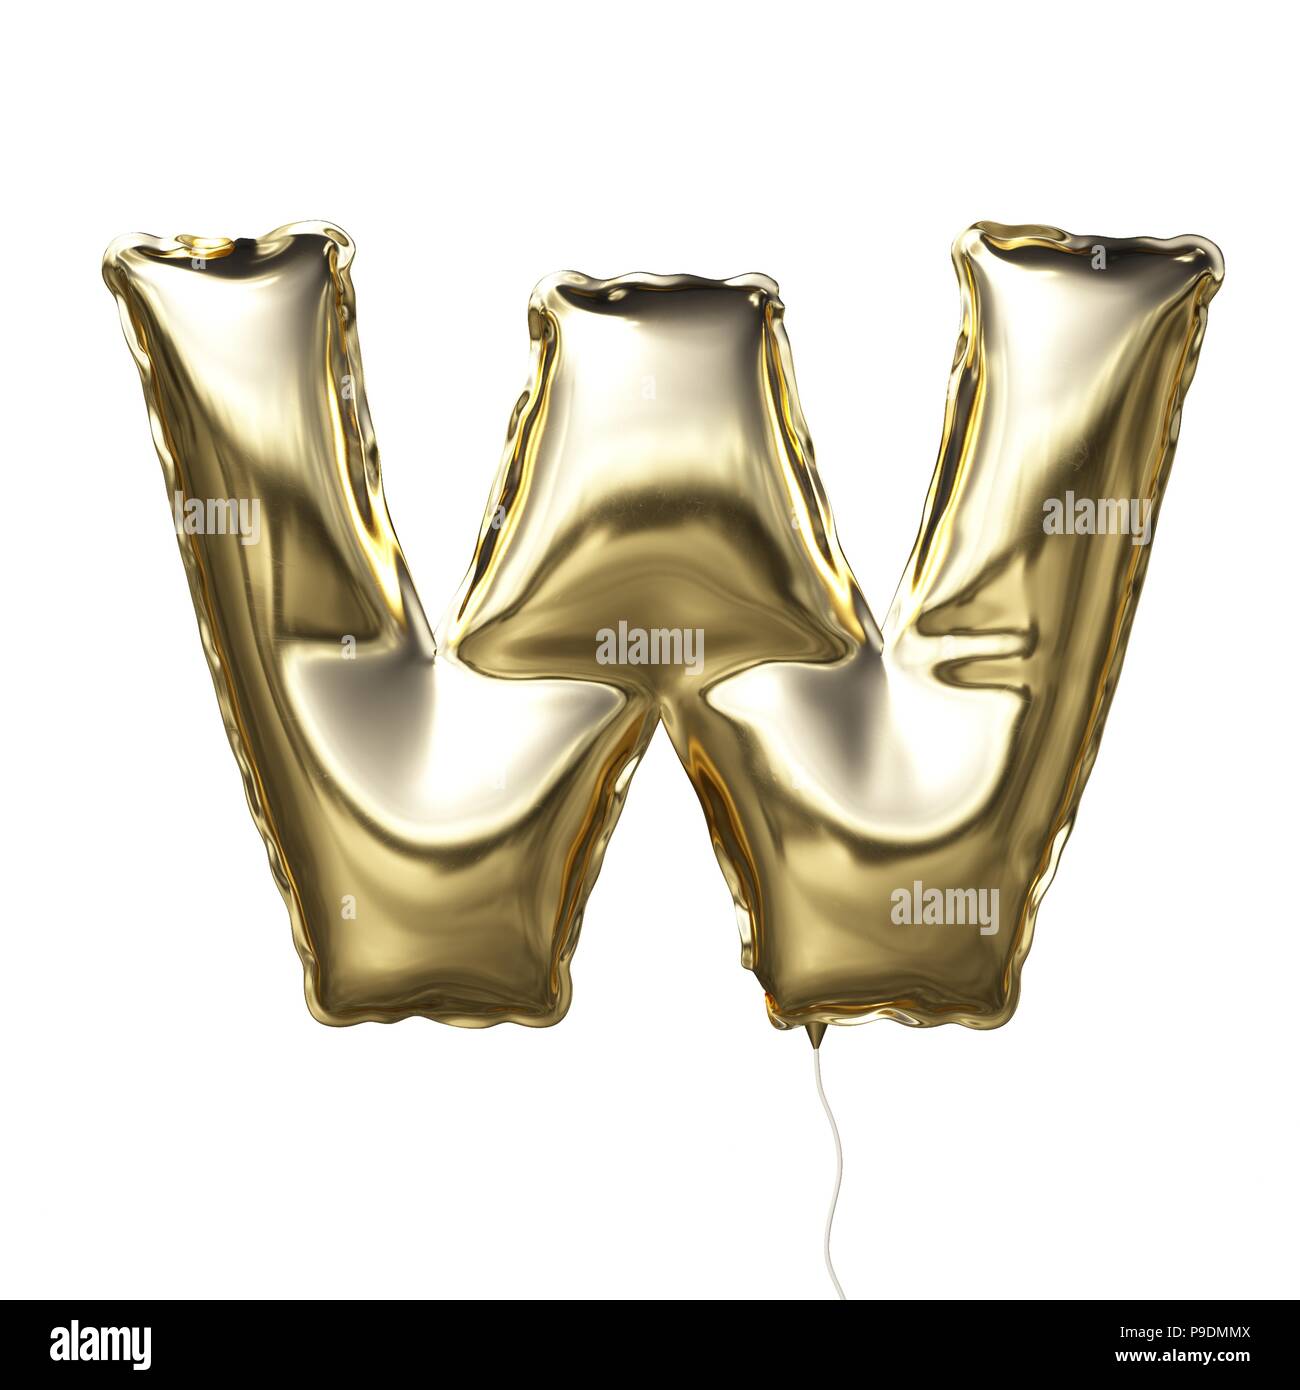 Letter W made of golden inflatable balloon isolated on white background Stock Photo